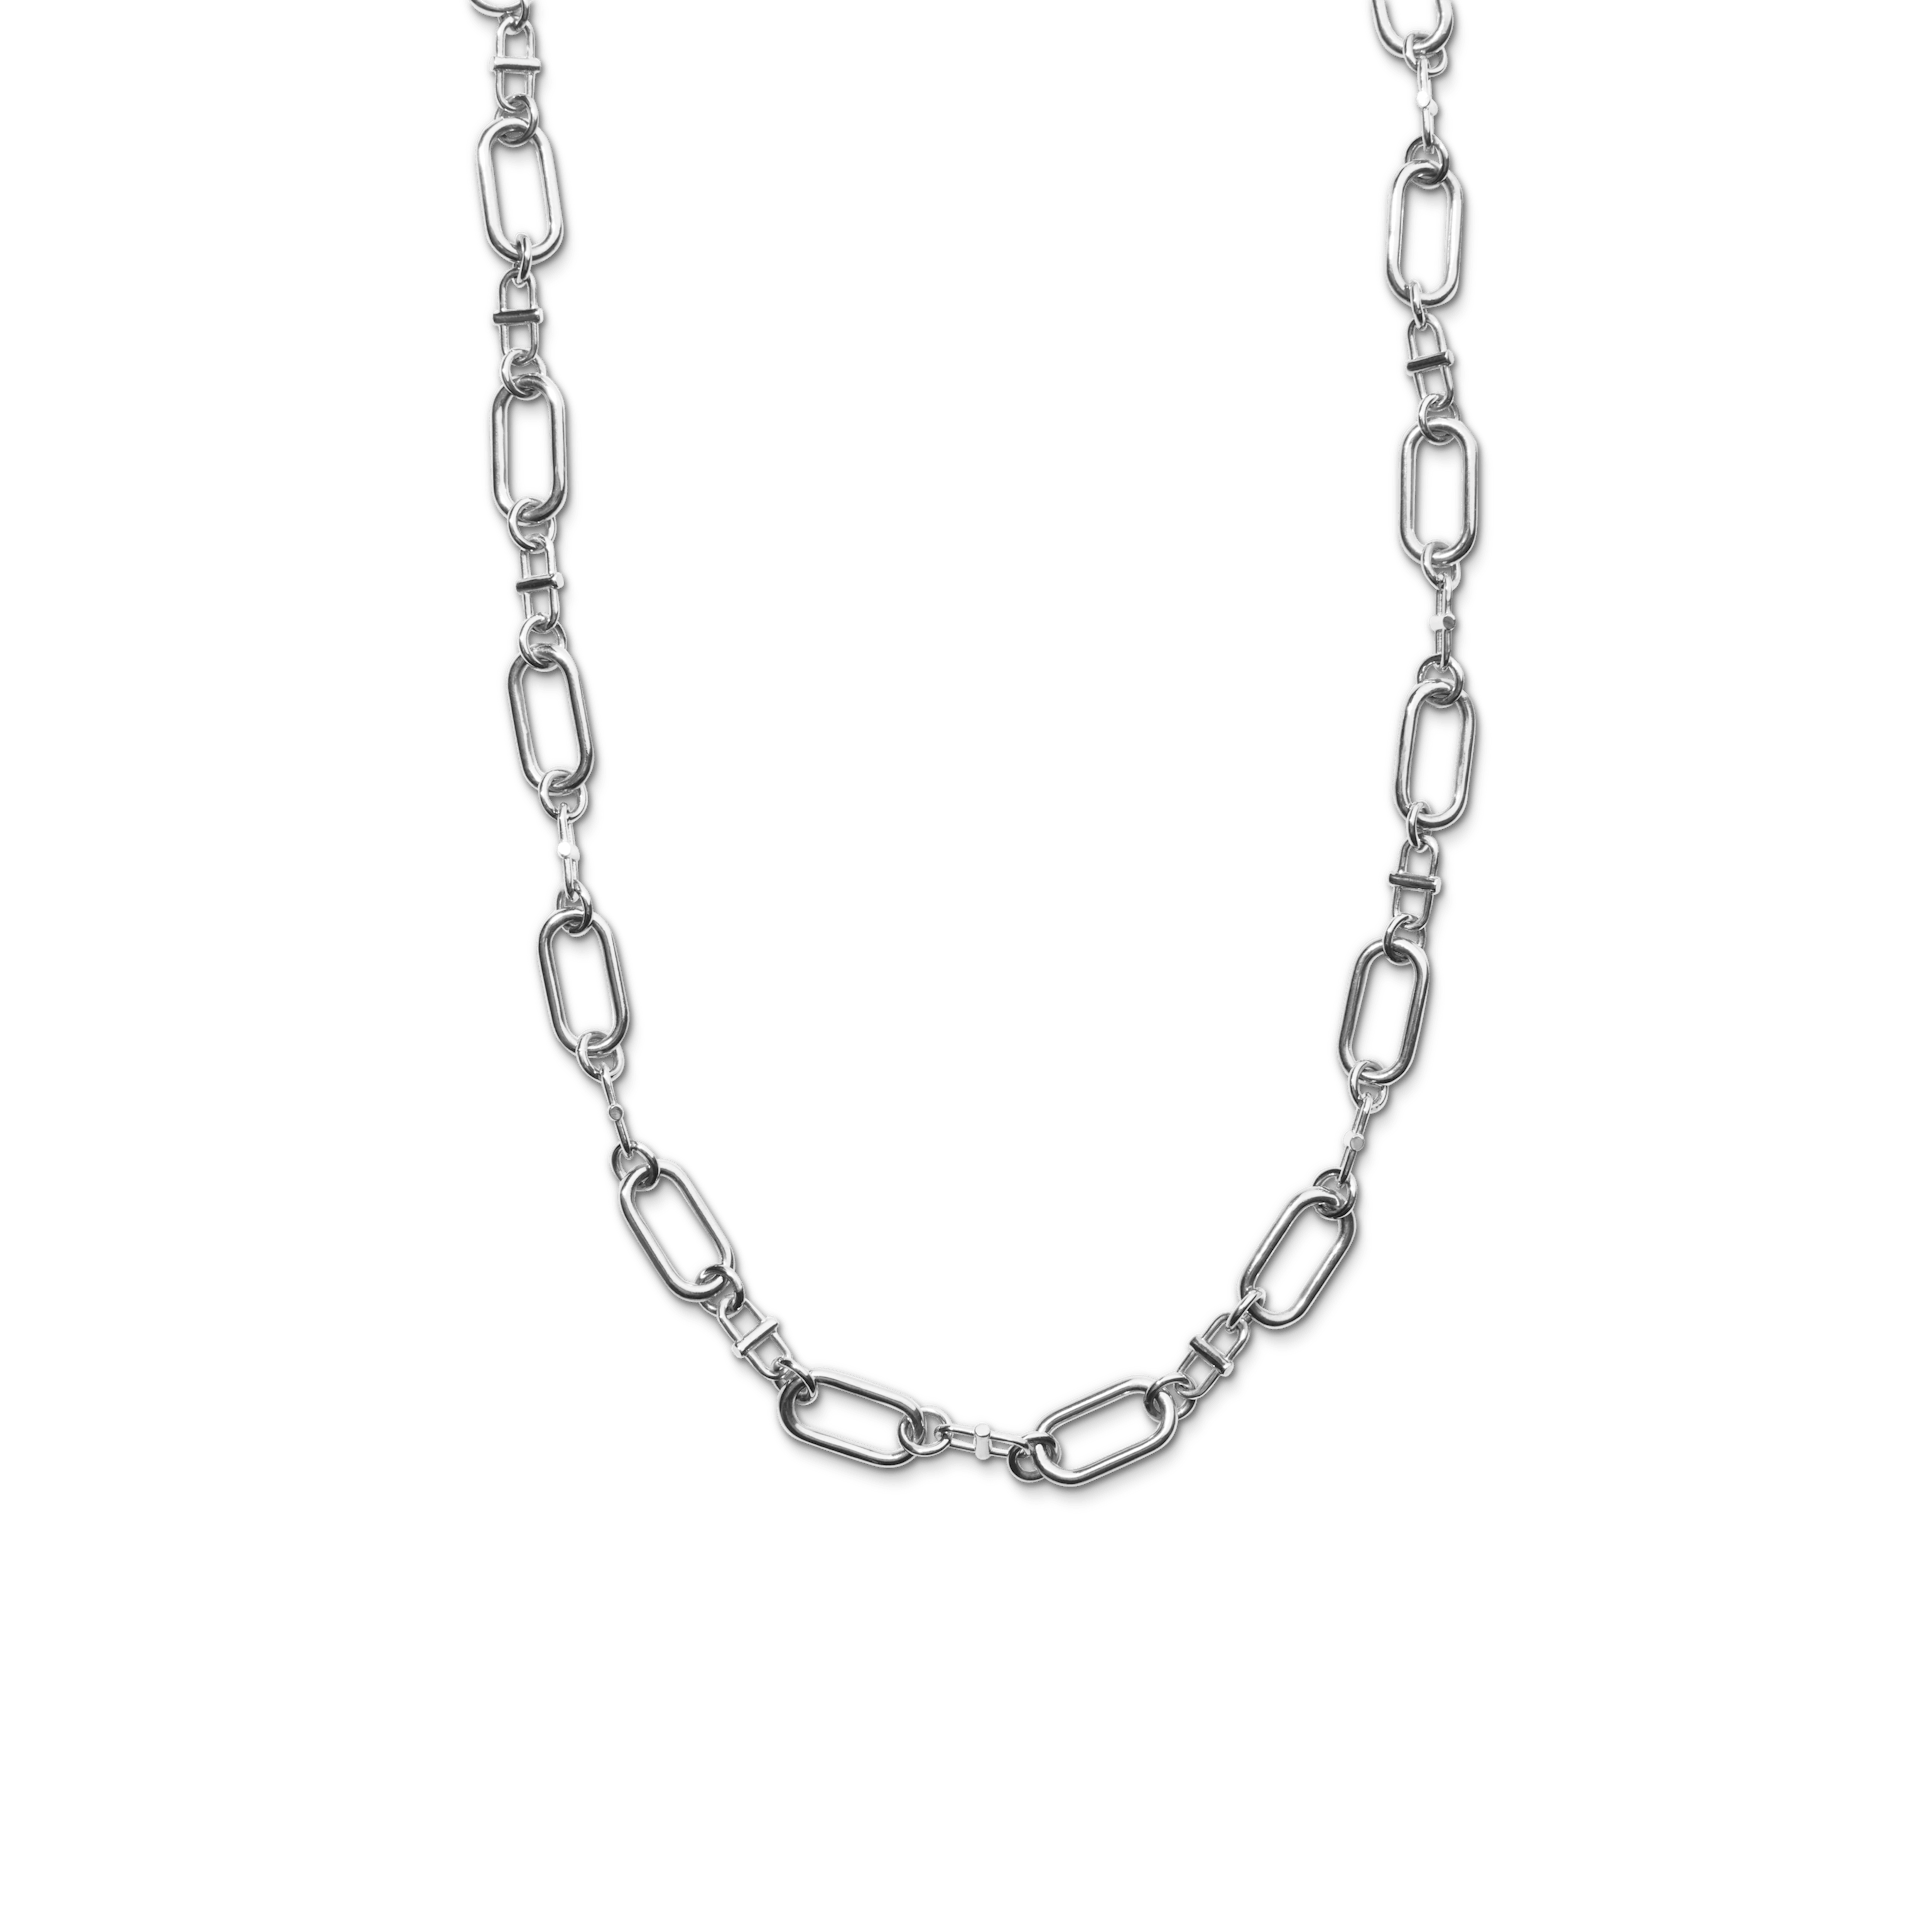 Oval and Bike Lock Link Necklace